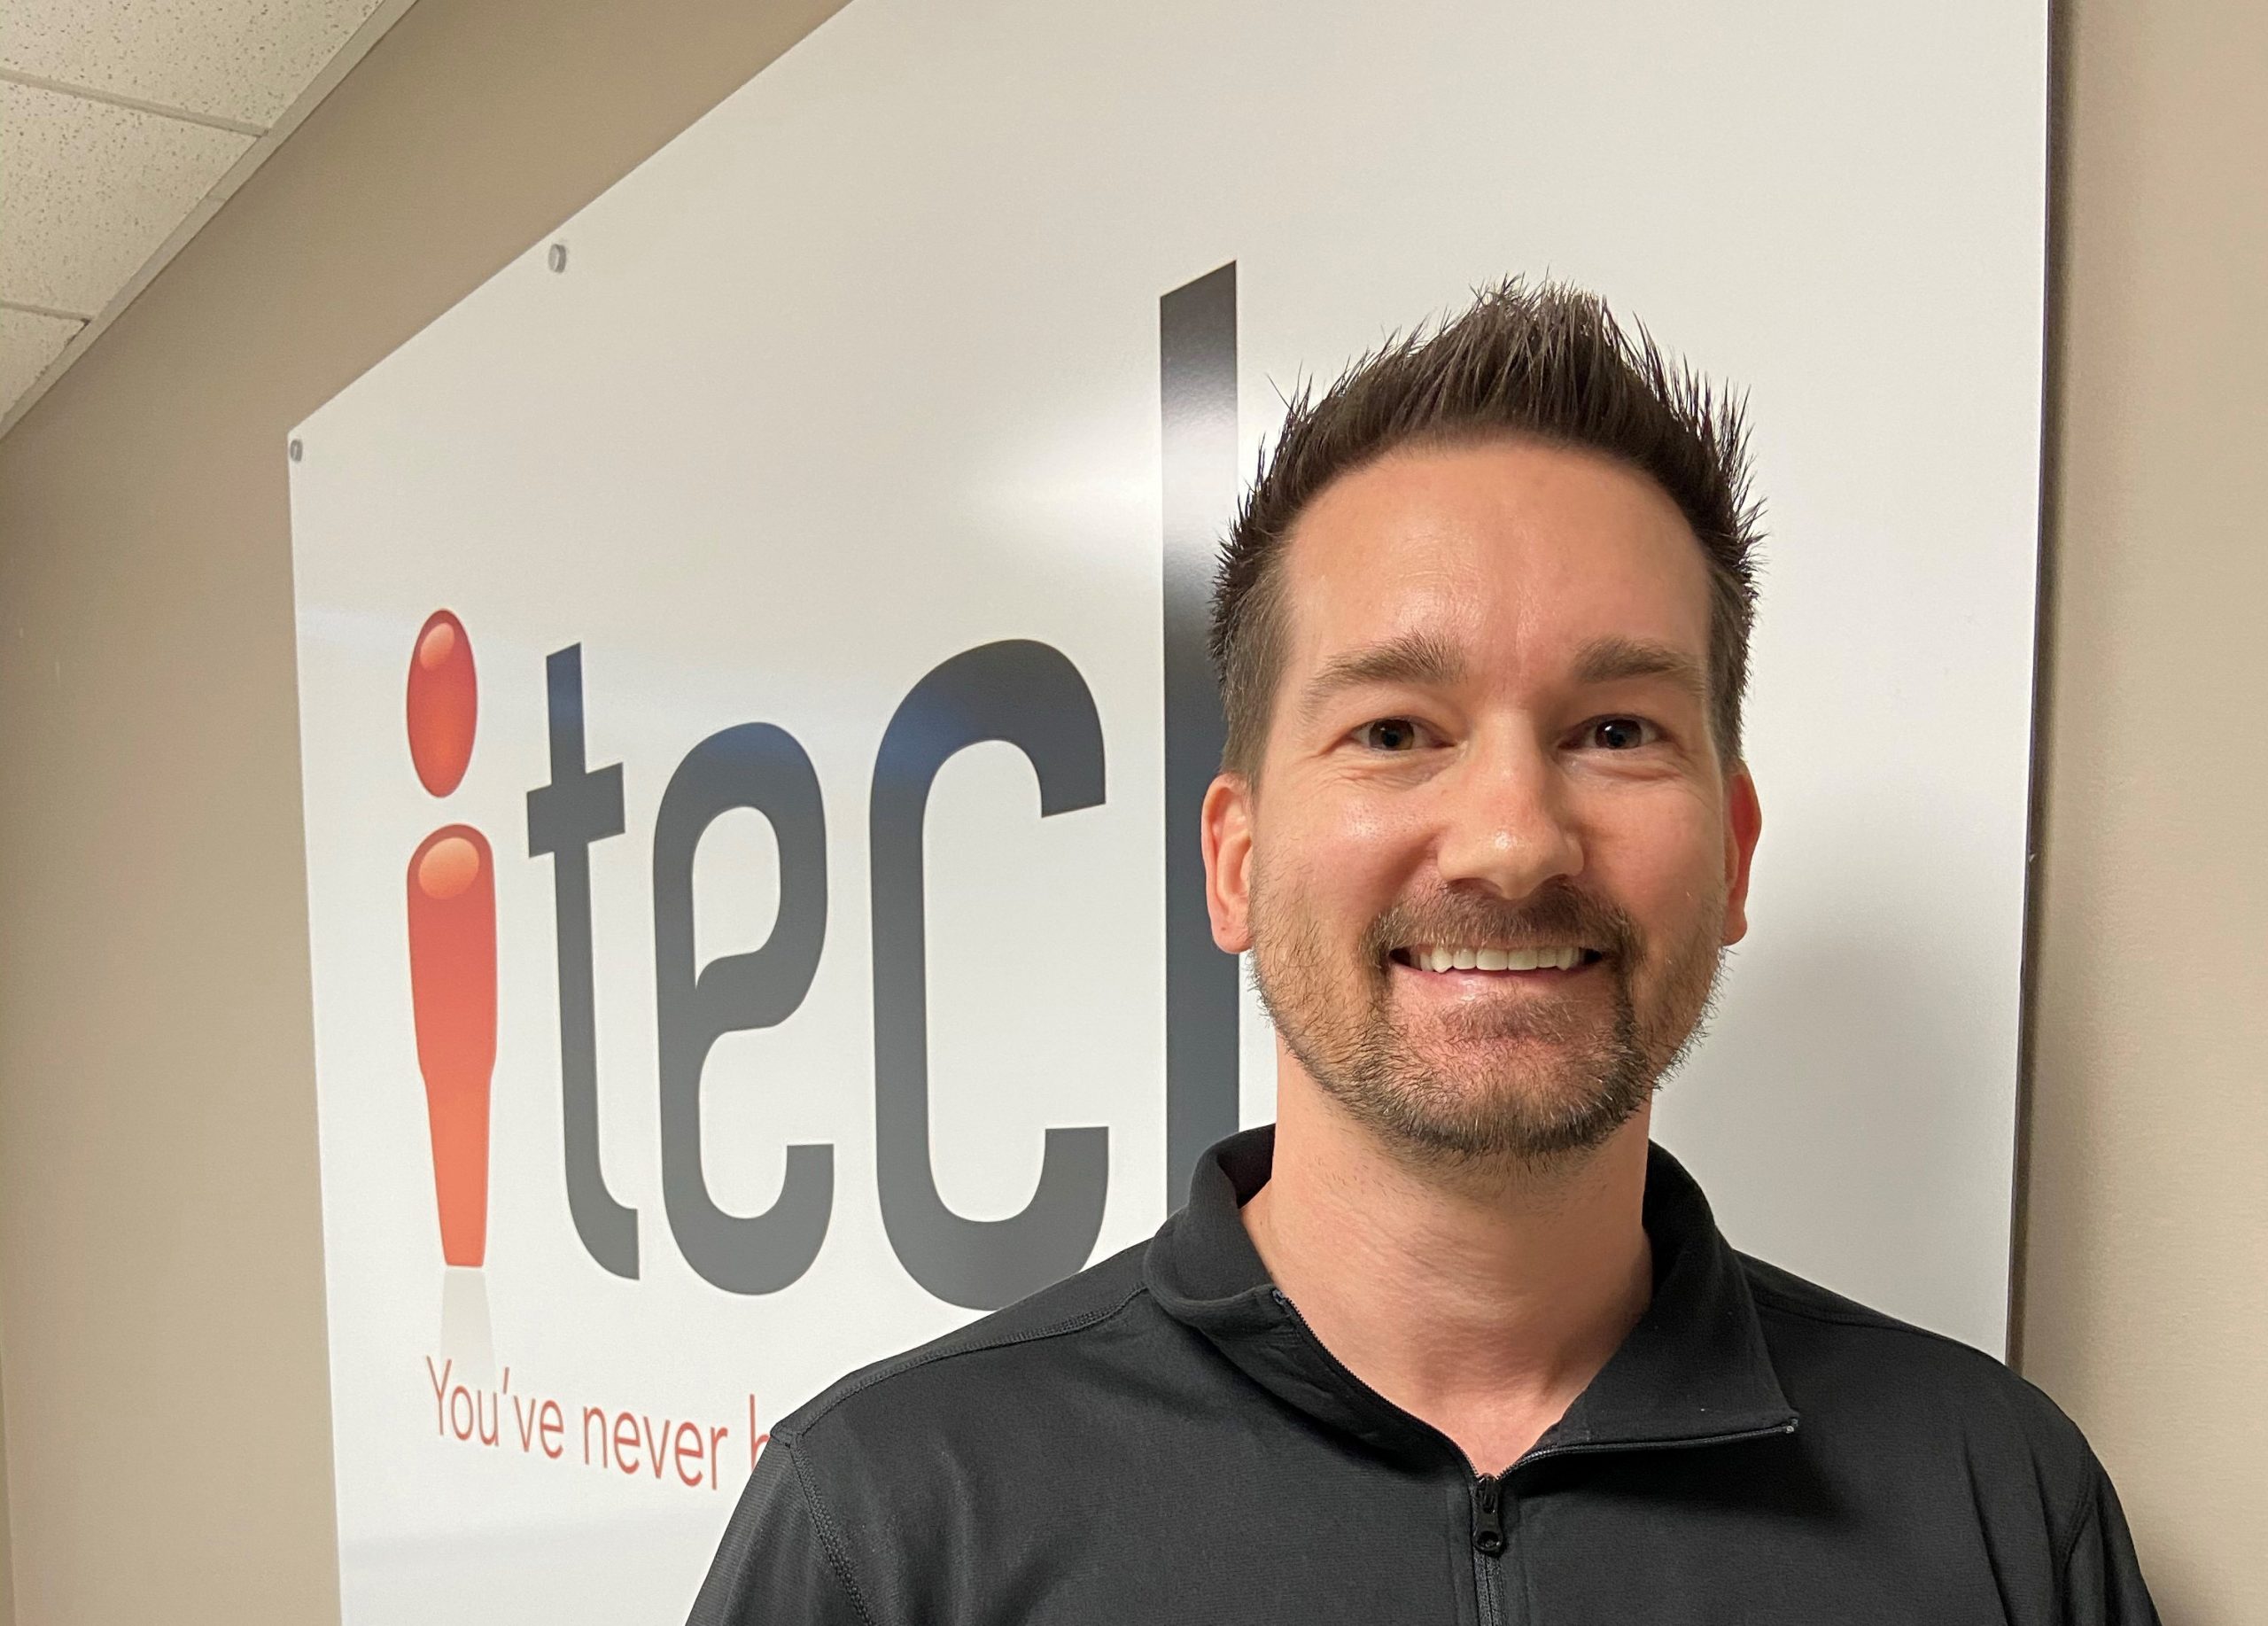 IT support company REDiTECH plans Iowa expansion